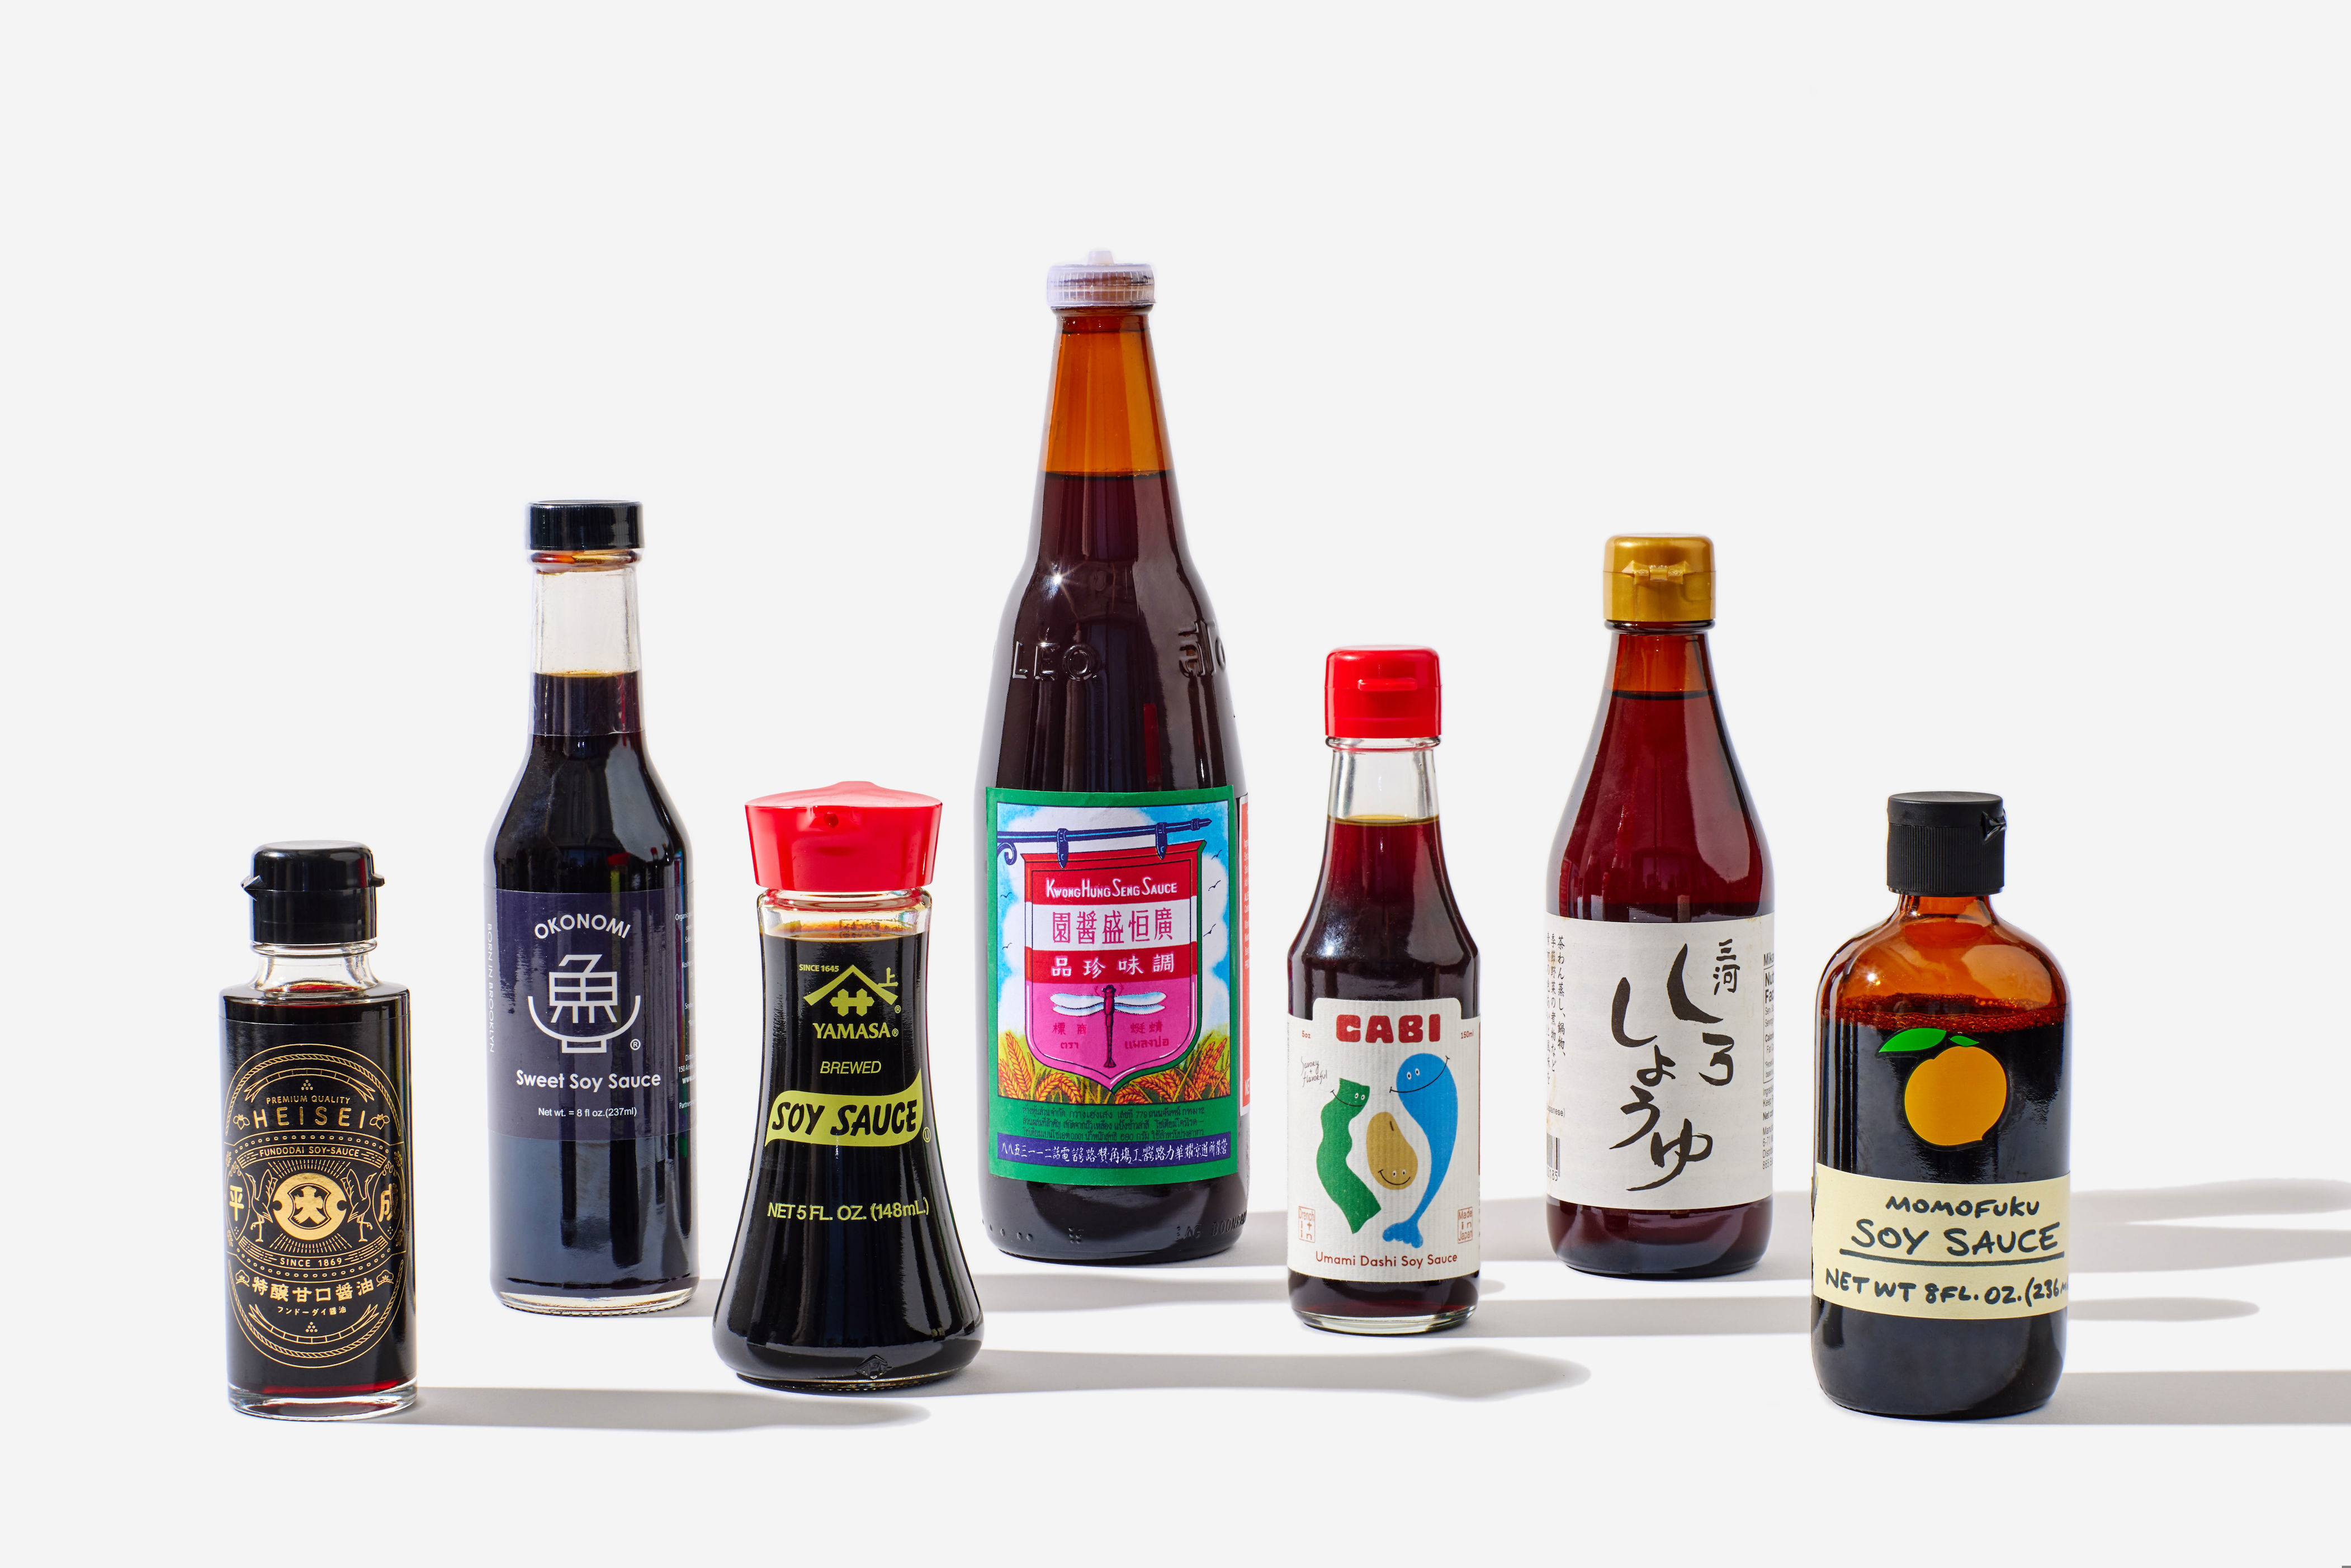 Does Soy Sauce Need to Be Refrigerated?